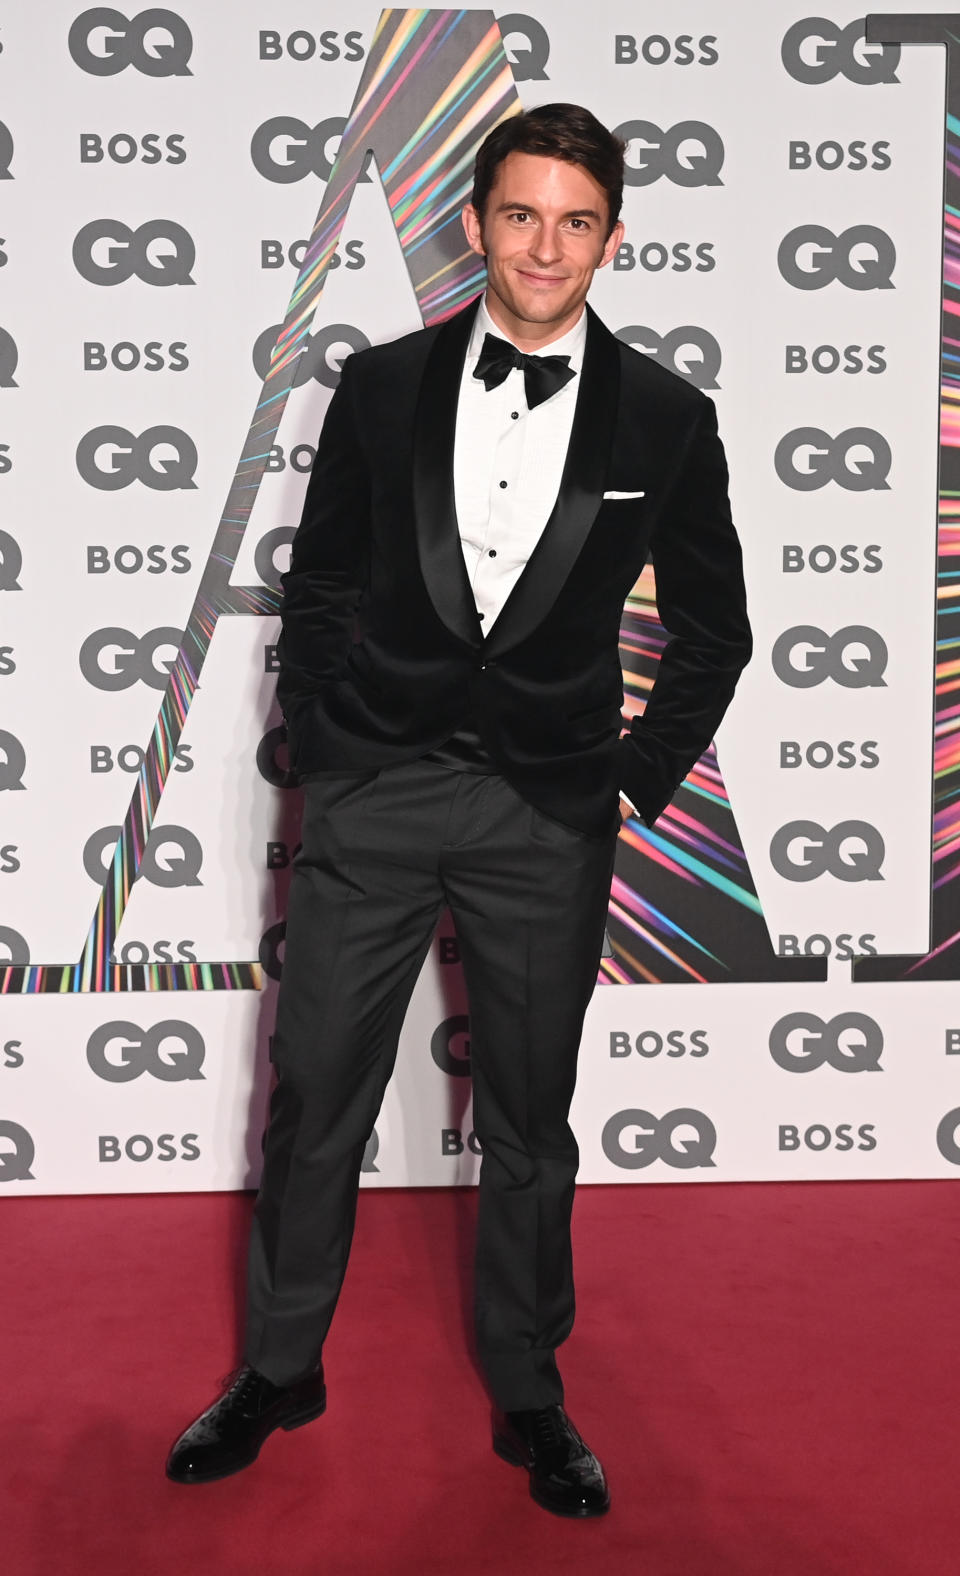 Jonathan Bailey attends the 24th GQ Men of the Year Awards in association with Boss wearing Brunello Cucinelli at Tate Modern on Sept. 1, 2021 in London. - Credit: Dave Benett